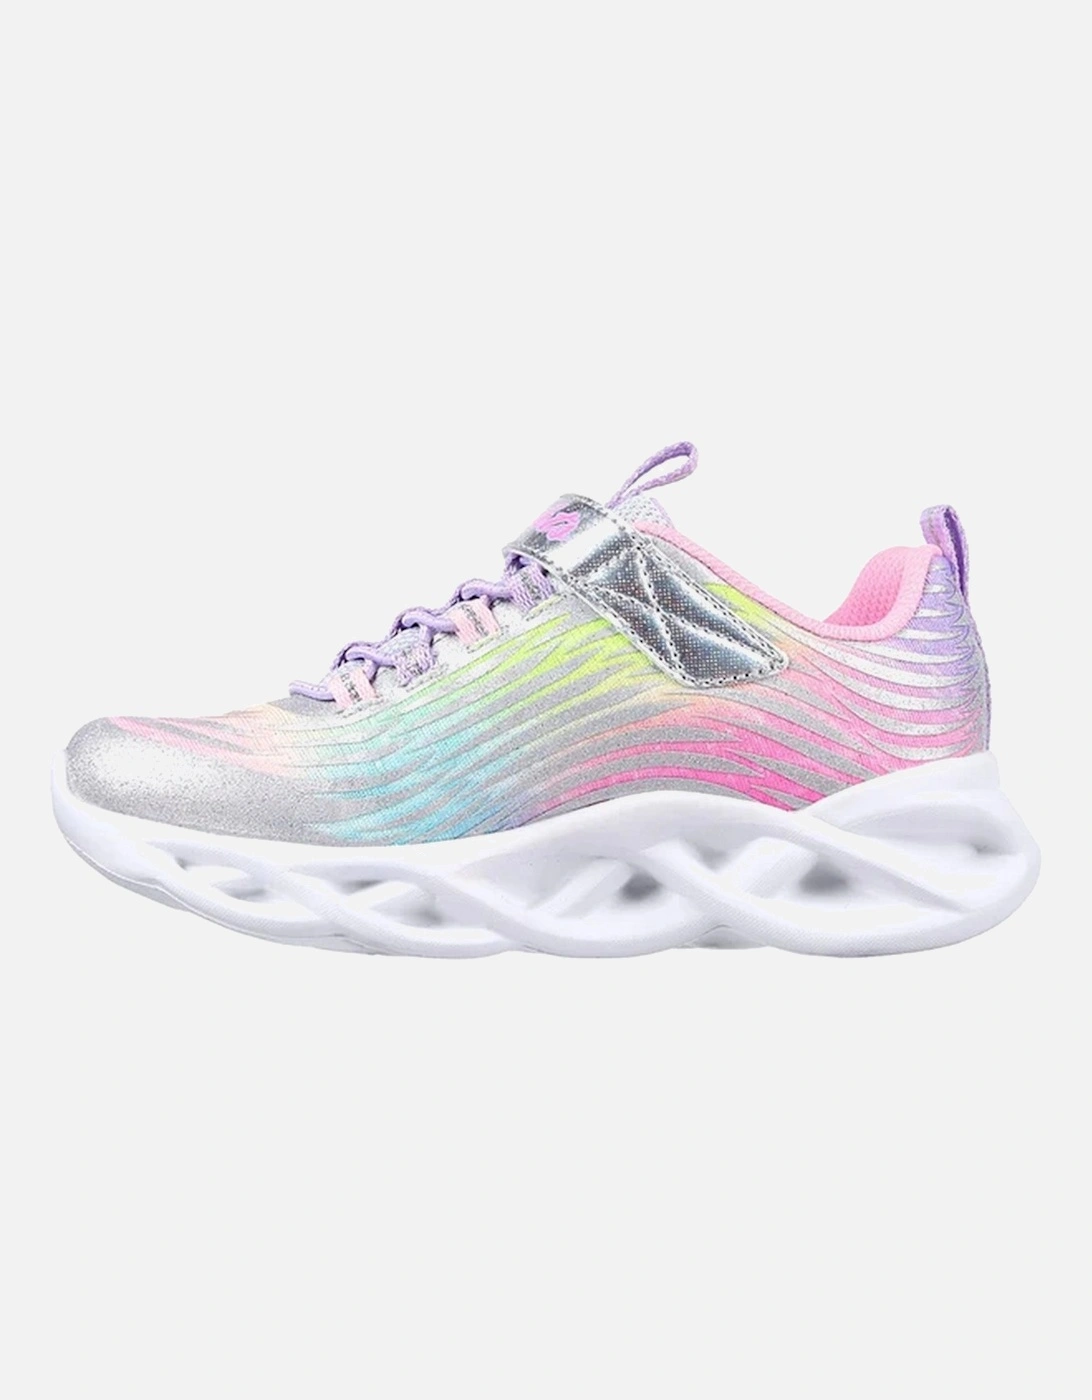 Girls S Lights Twisty Brights Mystical Bliss Trainers